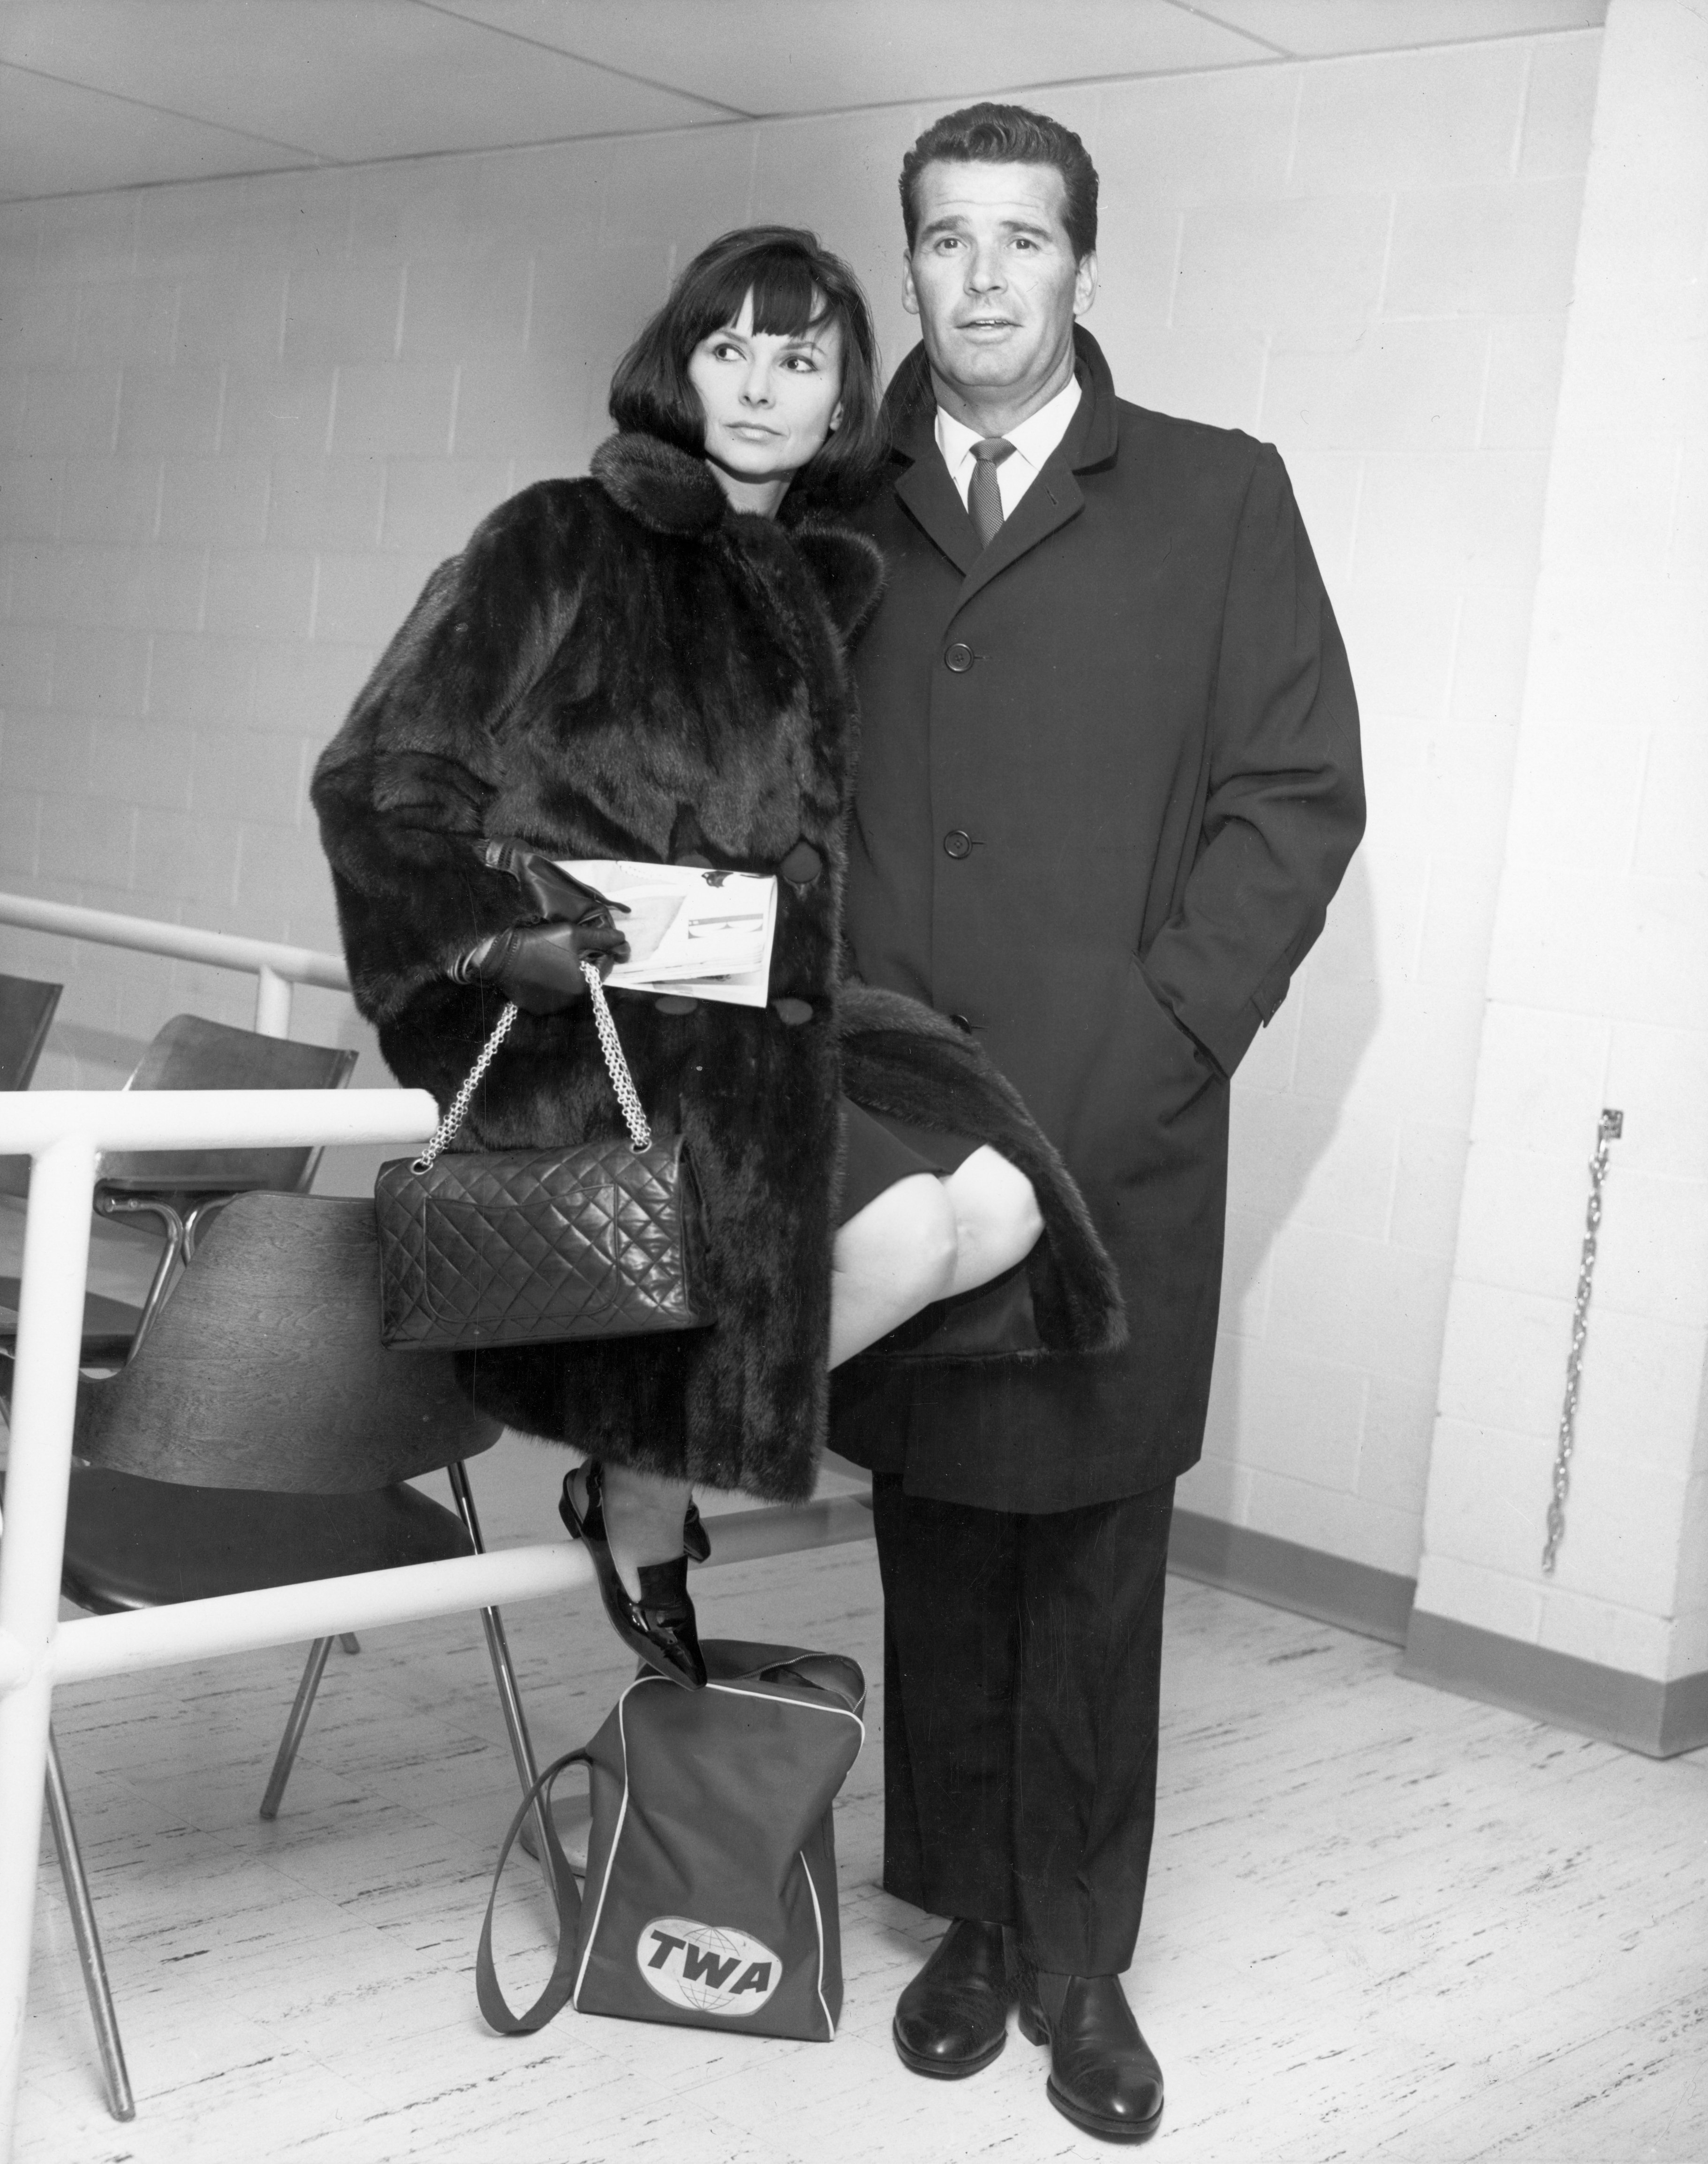 James Garner and his wife, Lois Clarke, inside John F Kennedy airport before boarding a flight to England from New York City. | Source: Getty Images